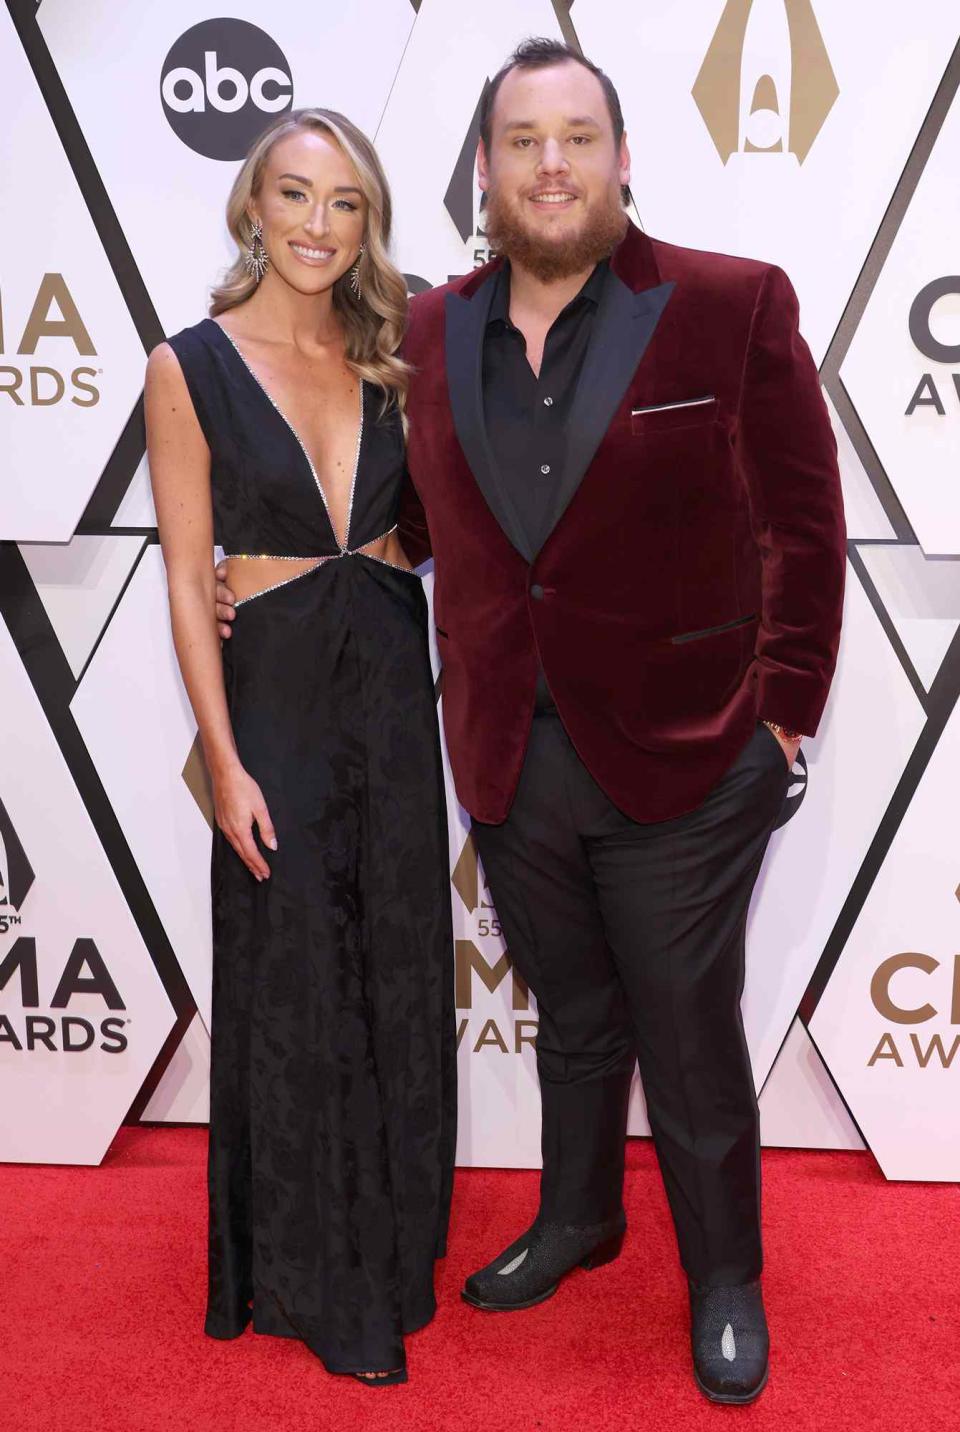 Nicole Hocking and Luke Combs attend the 55th annual Country Music Association awards at the Bridgestone Arena on November 10, 2021 in Nashville, Tennessee